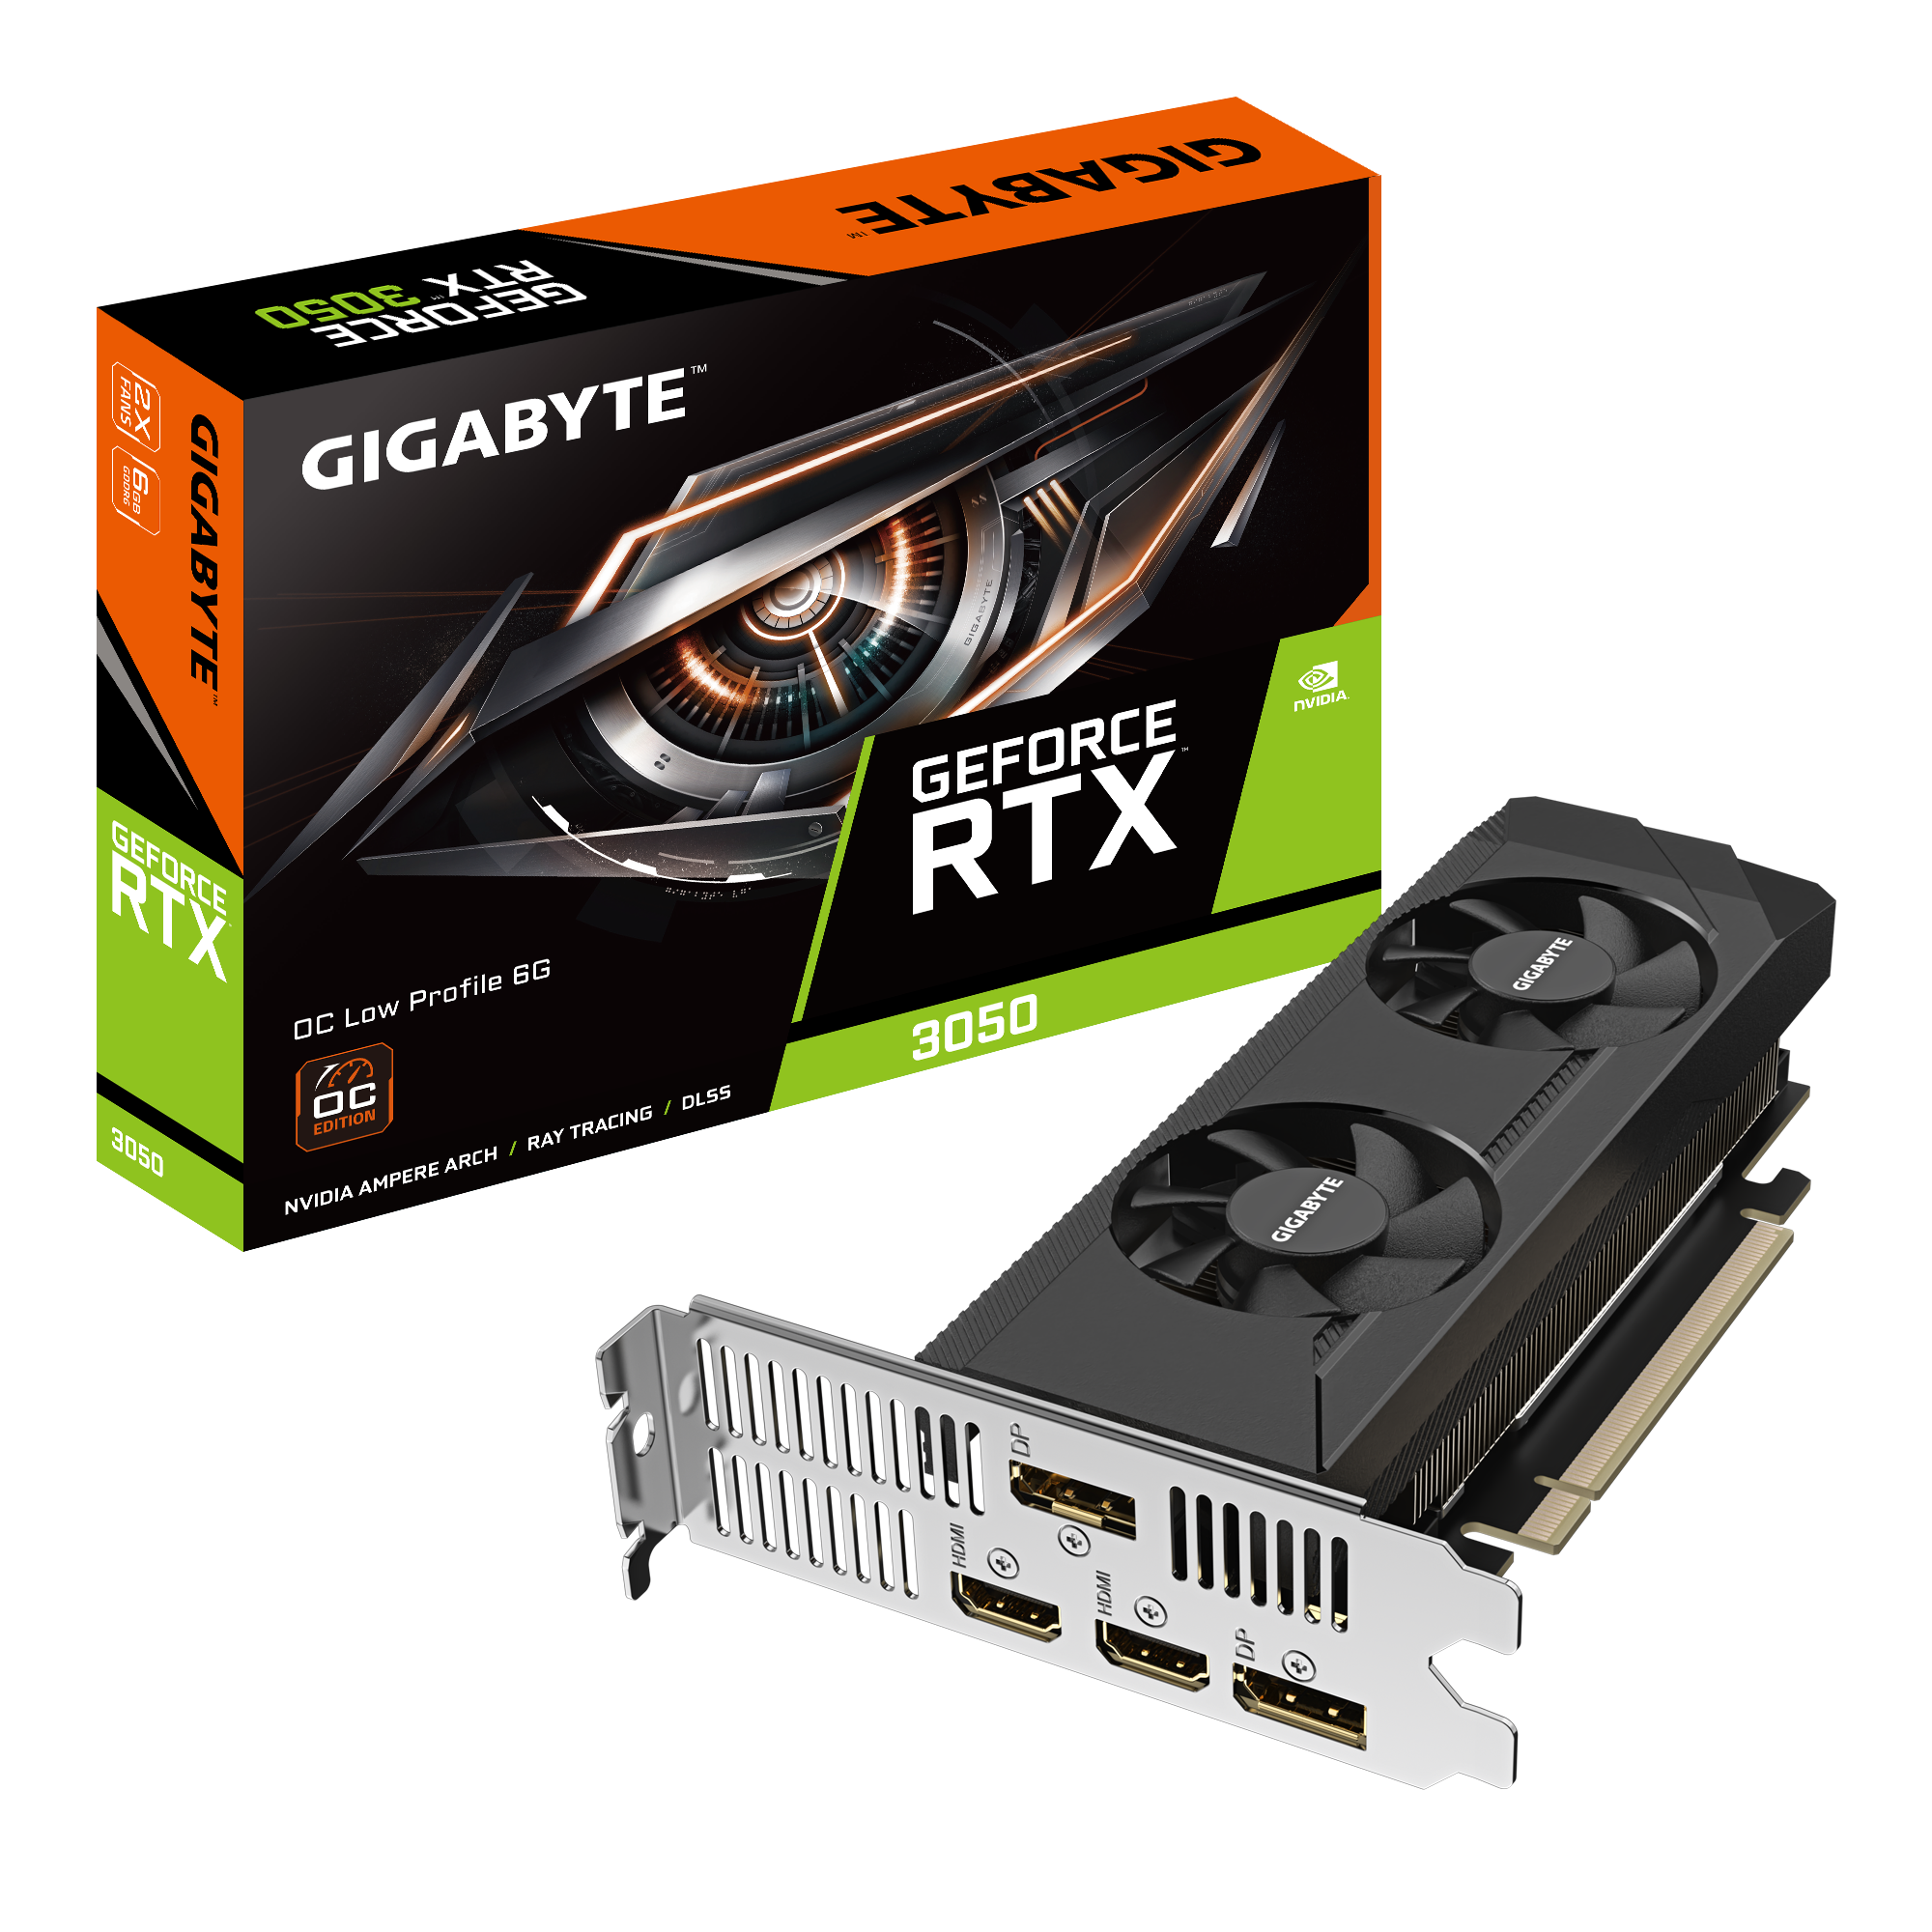 Ready go to ... https://www.gigabyte.com/Graphics-Card/GV-N3050OC-6GL [ GeForce RTX™ 3050 OC Low Profile 6G Key Features | Graphics Card - GIGABYTE Global]